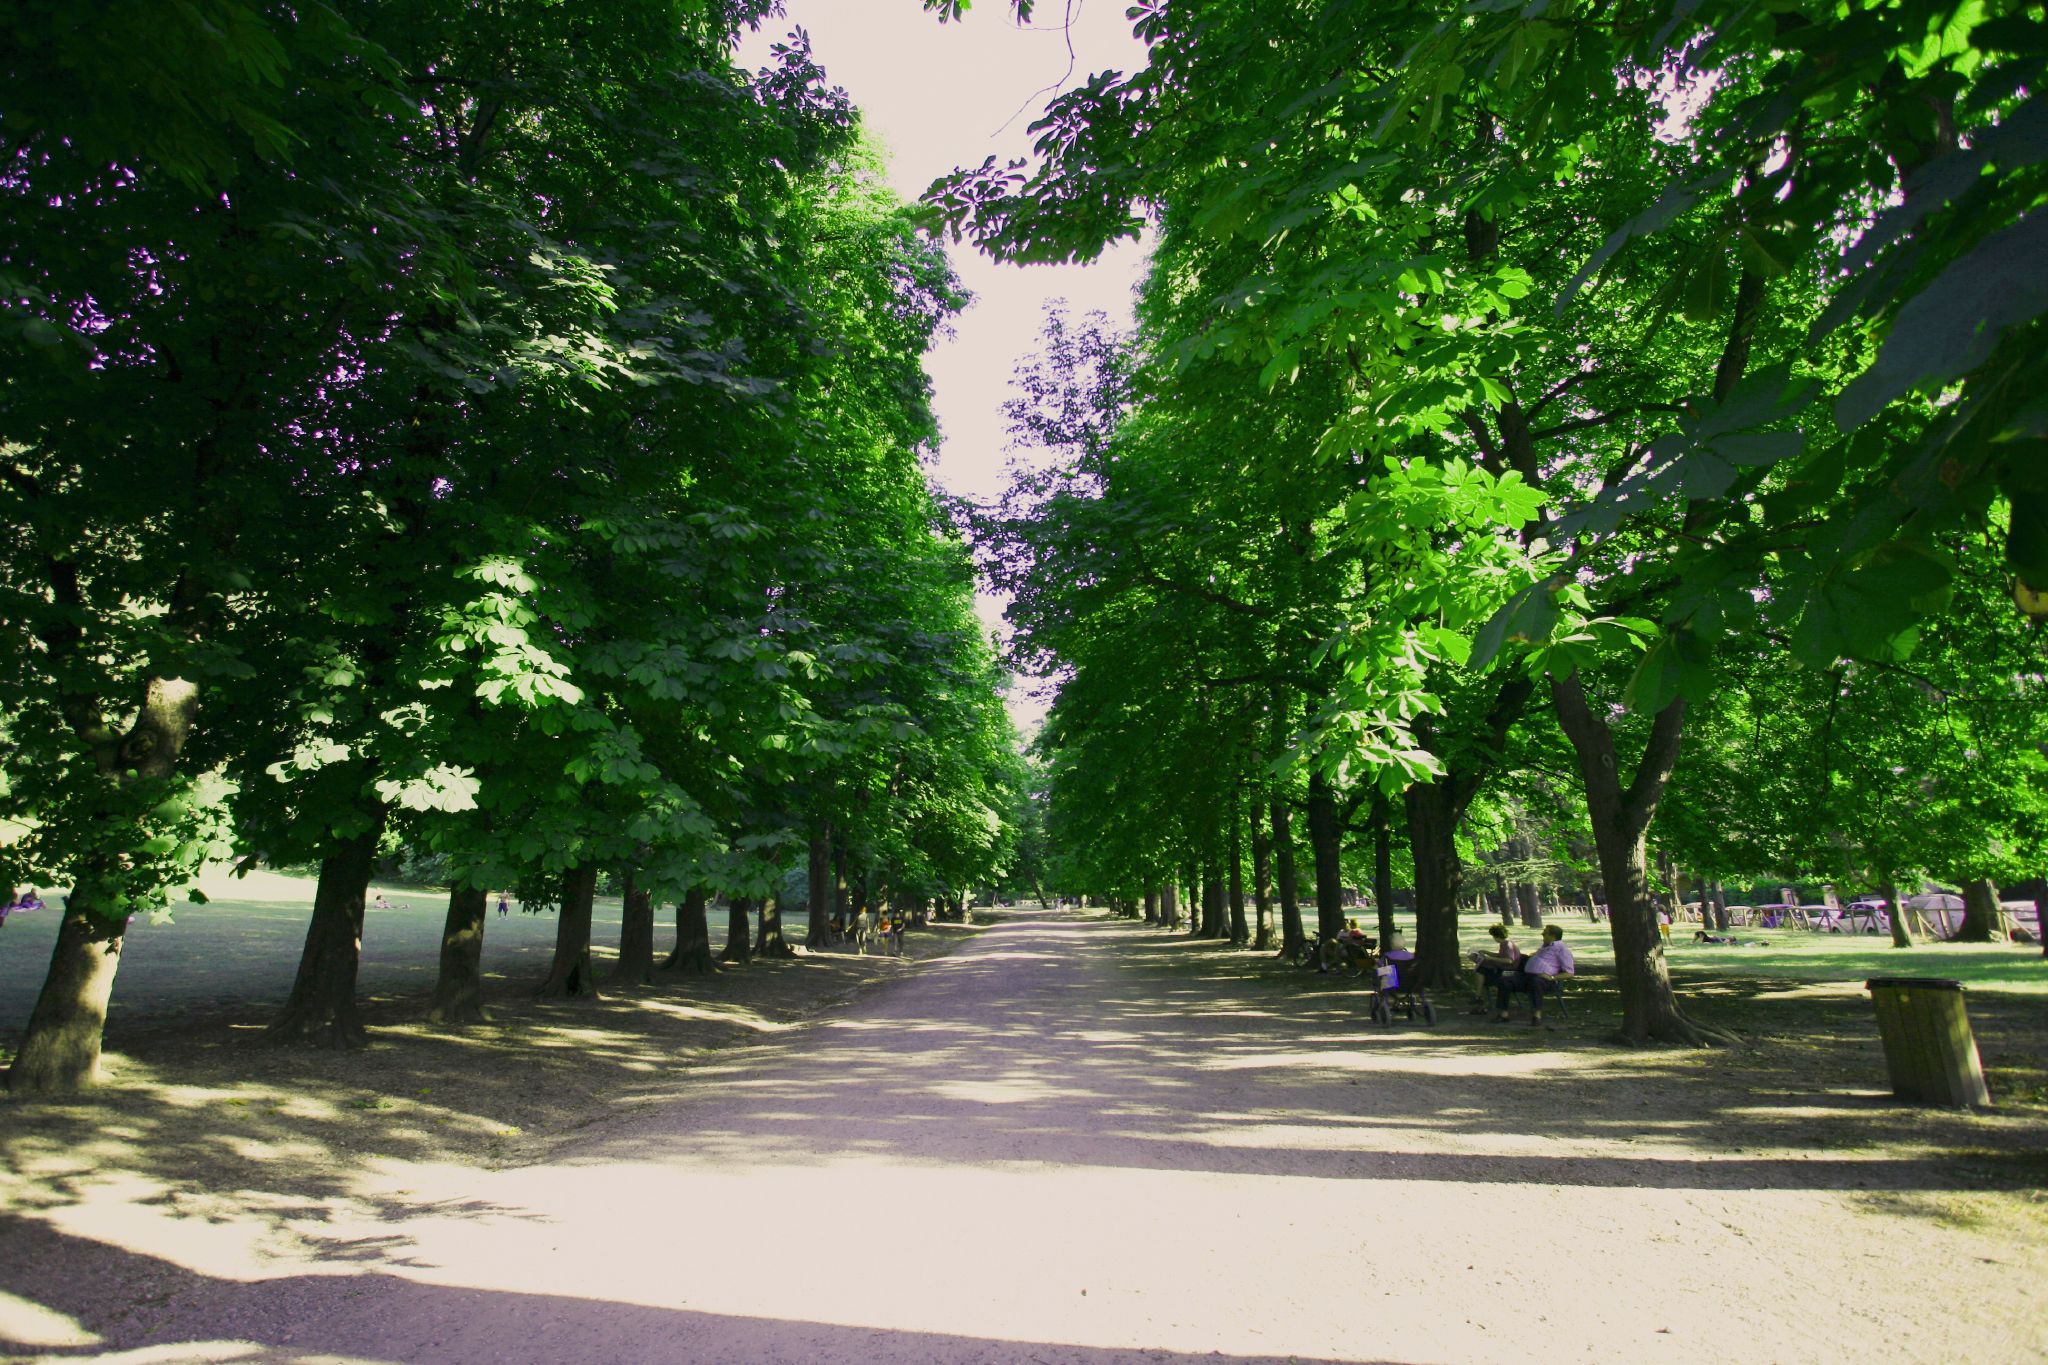 a path lined with trees in a park